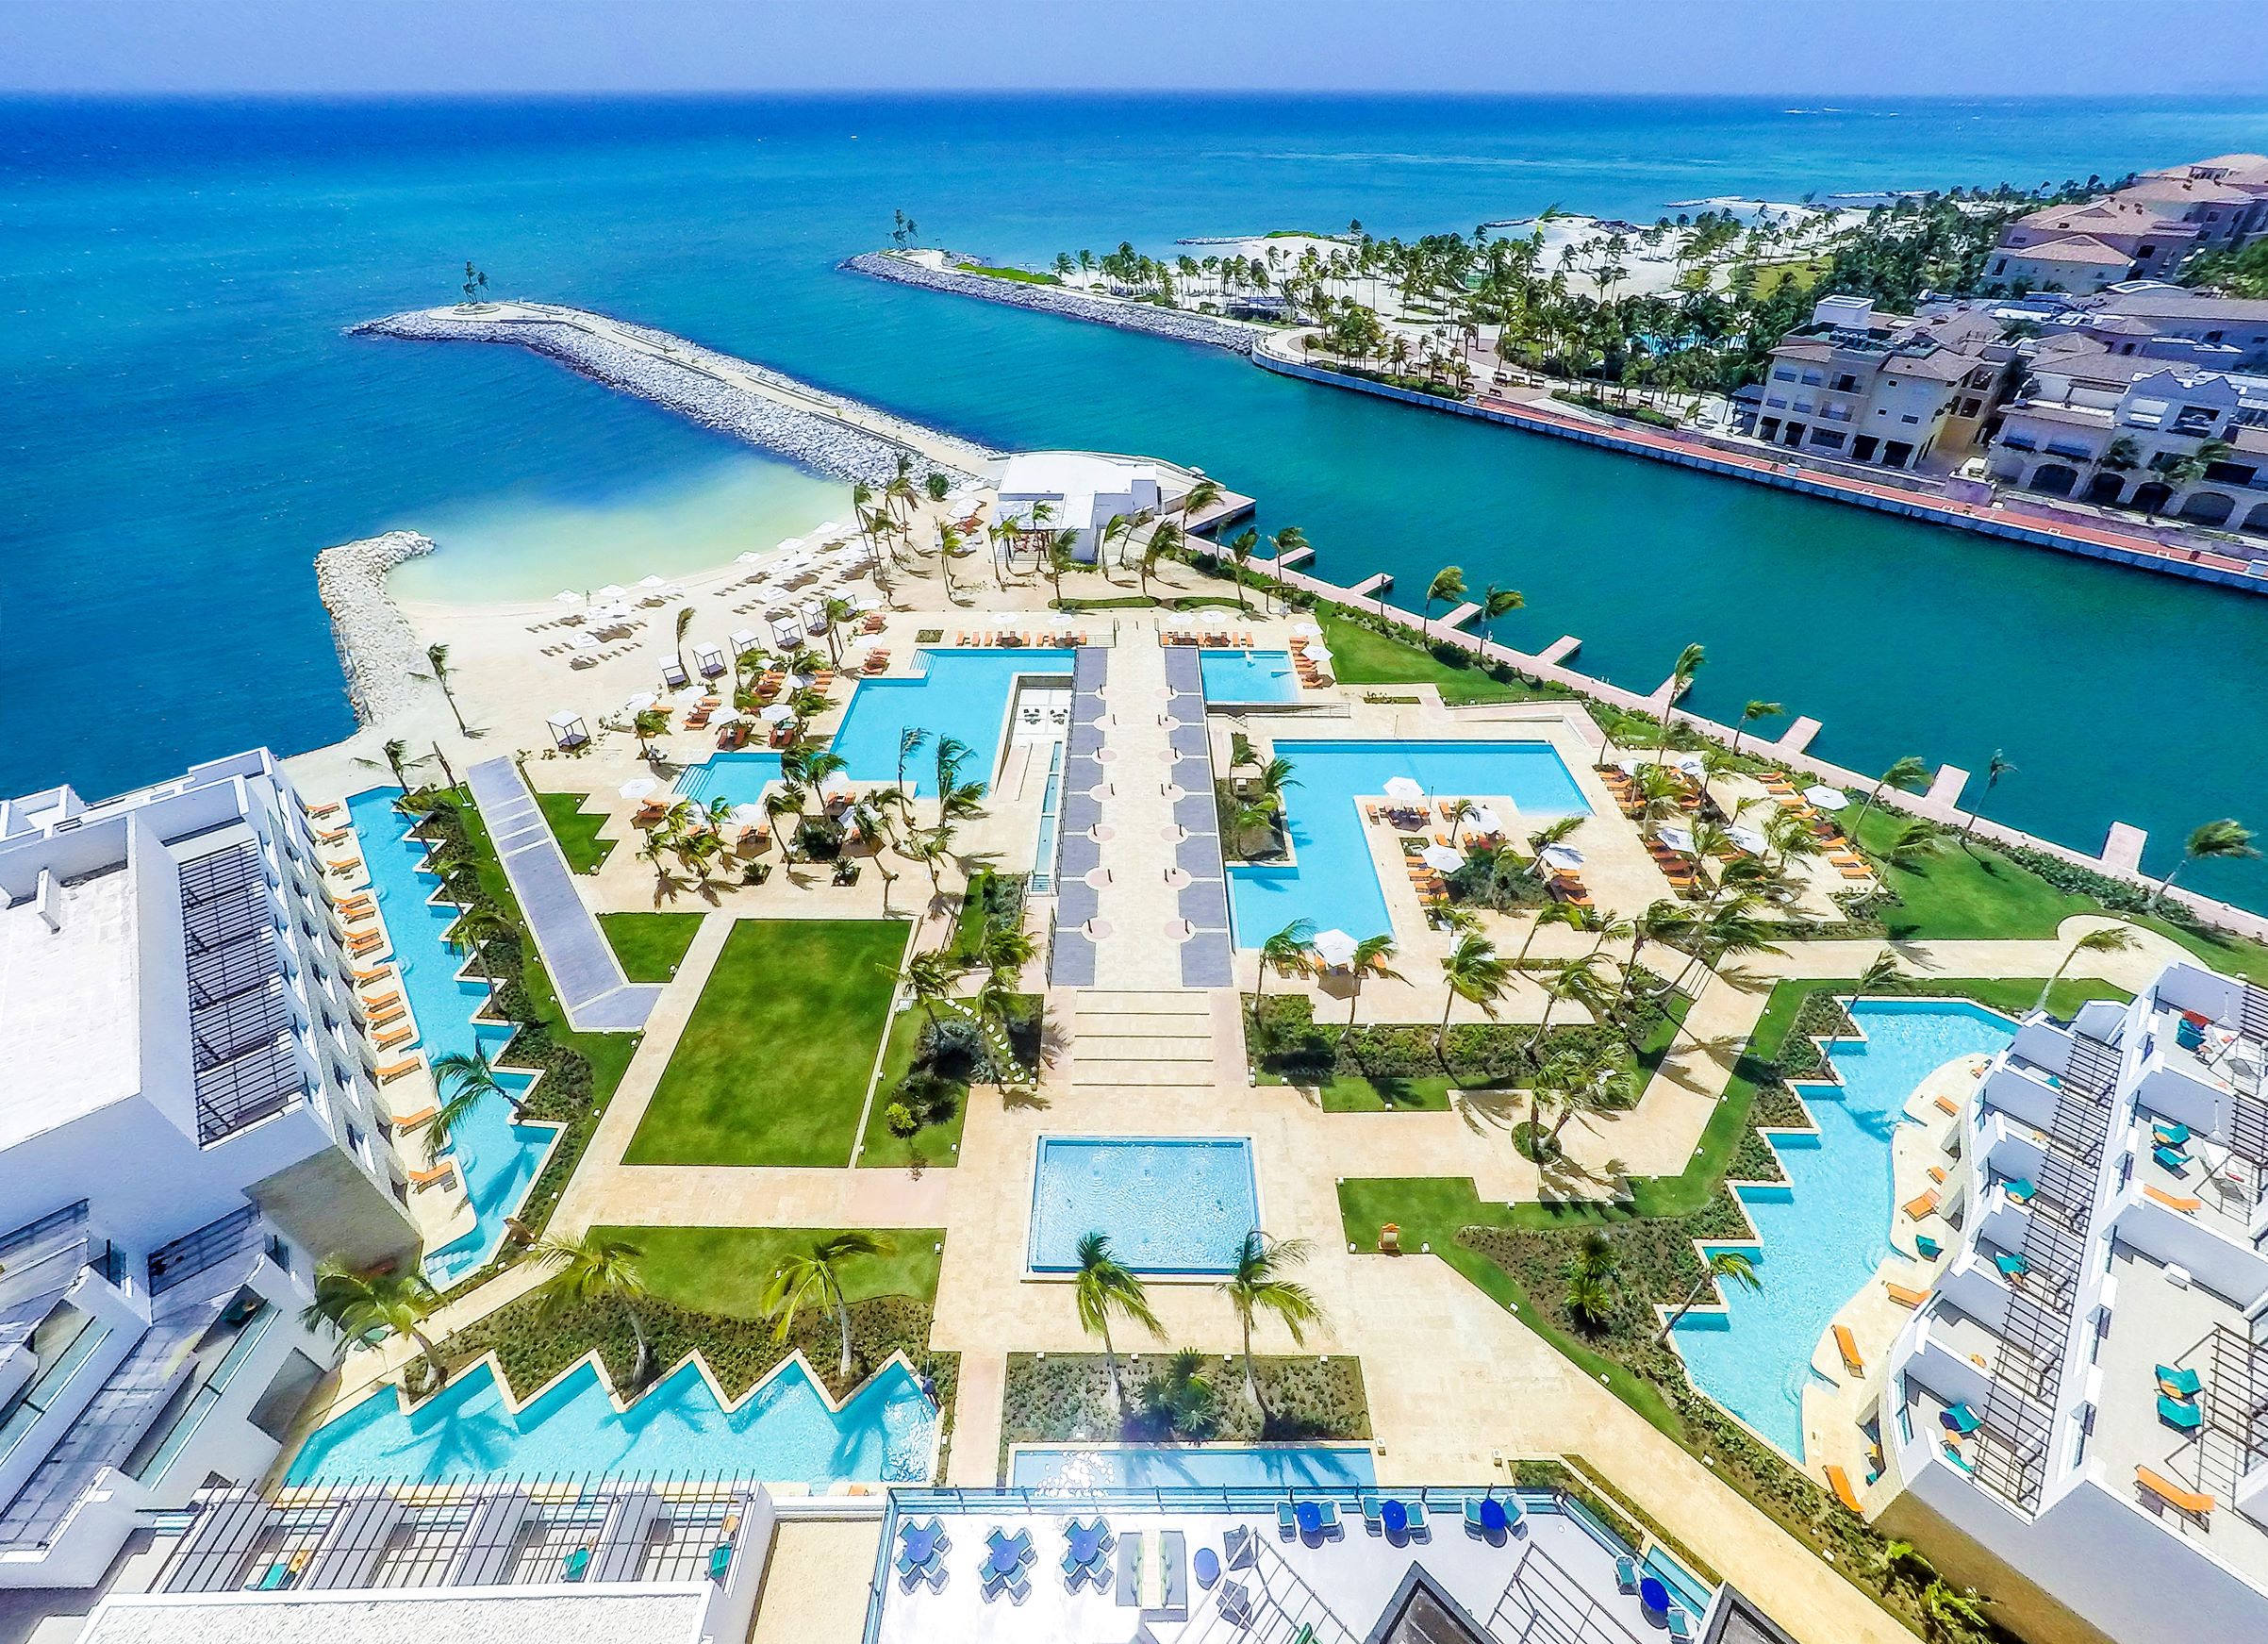 Trs Cap Cana Waterfront  Marina Hotel - Adults Only